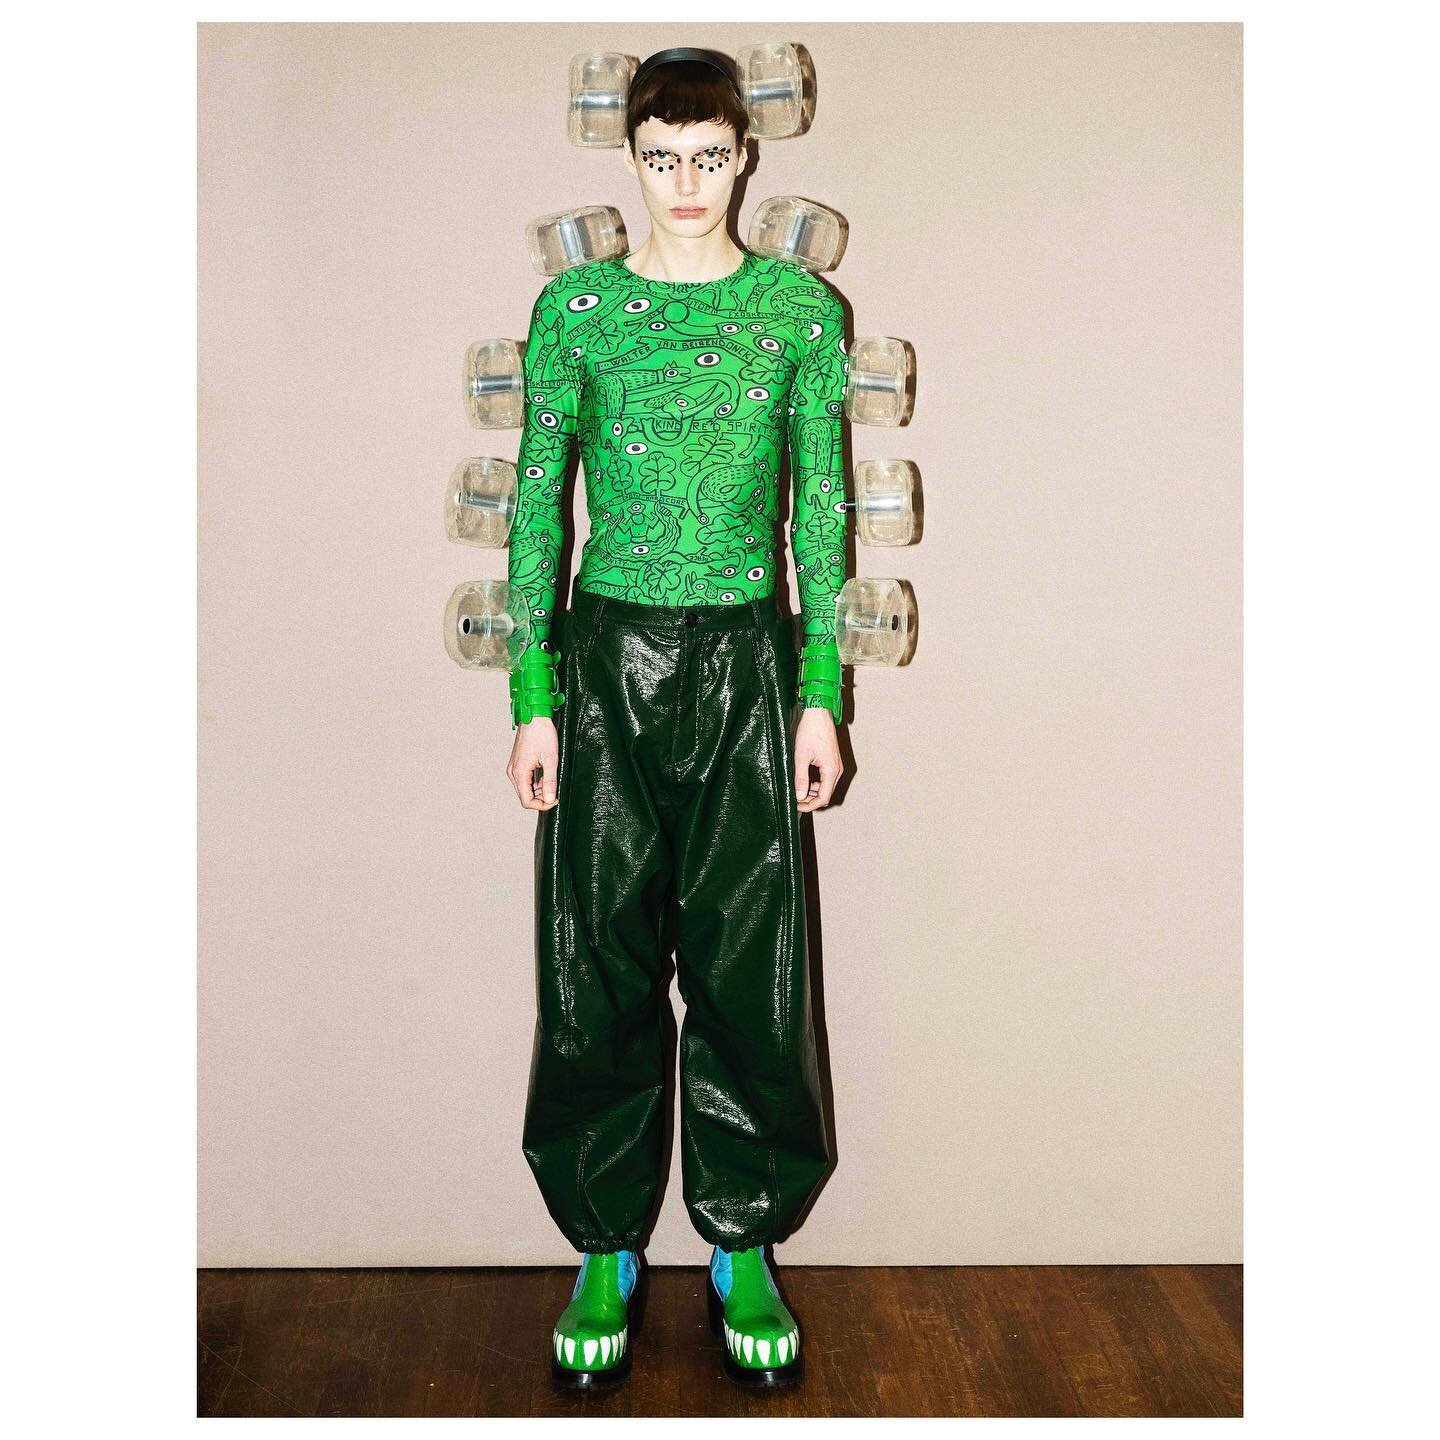 #thx for your trust!

WE NEED NEW EYES T O SEE THE FUTURE A/W2023/24 by
@waltervanbeirendonckofficial 

@charlielemindu 
@jennekecroubels 
@callisteagency 
@totem_fashion 

#waltervanbeirendonck #aw23 #